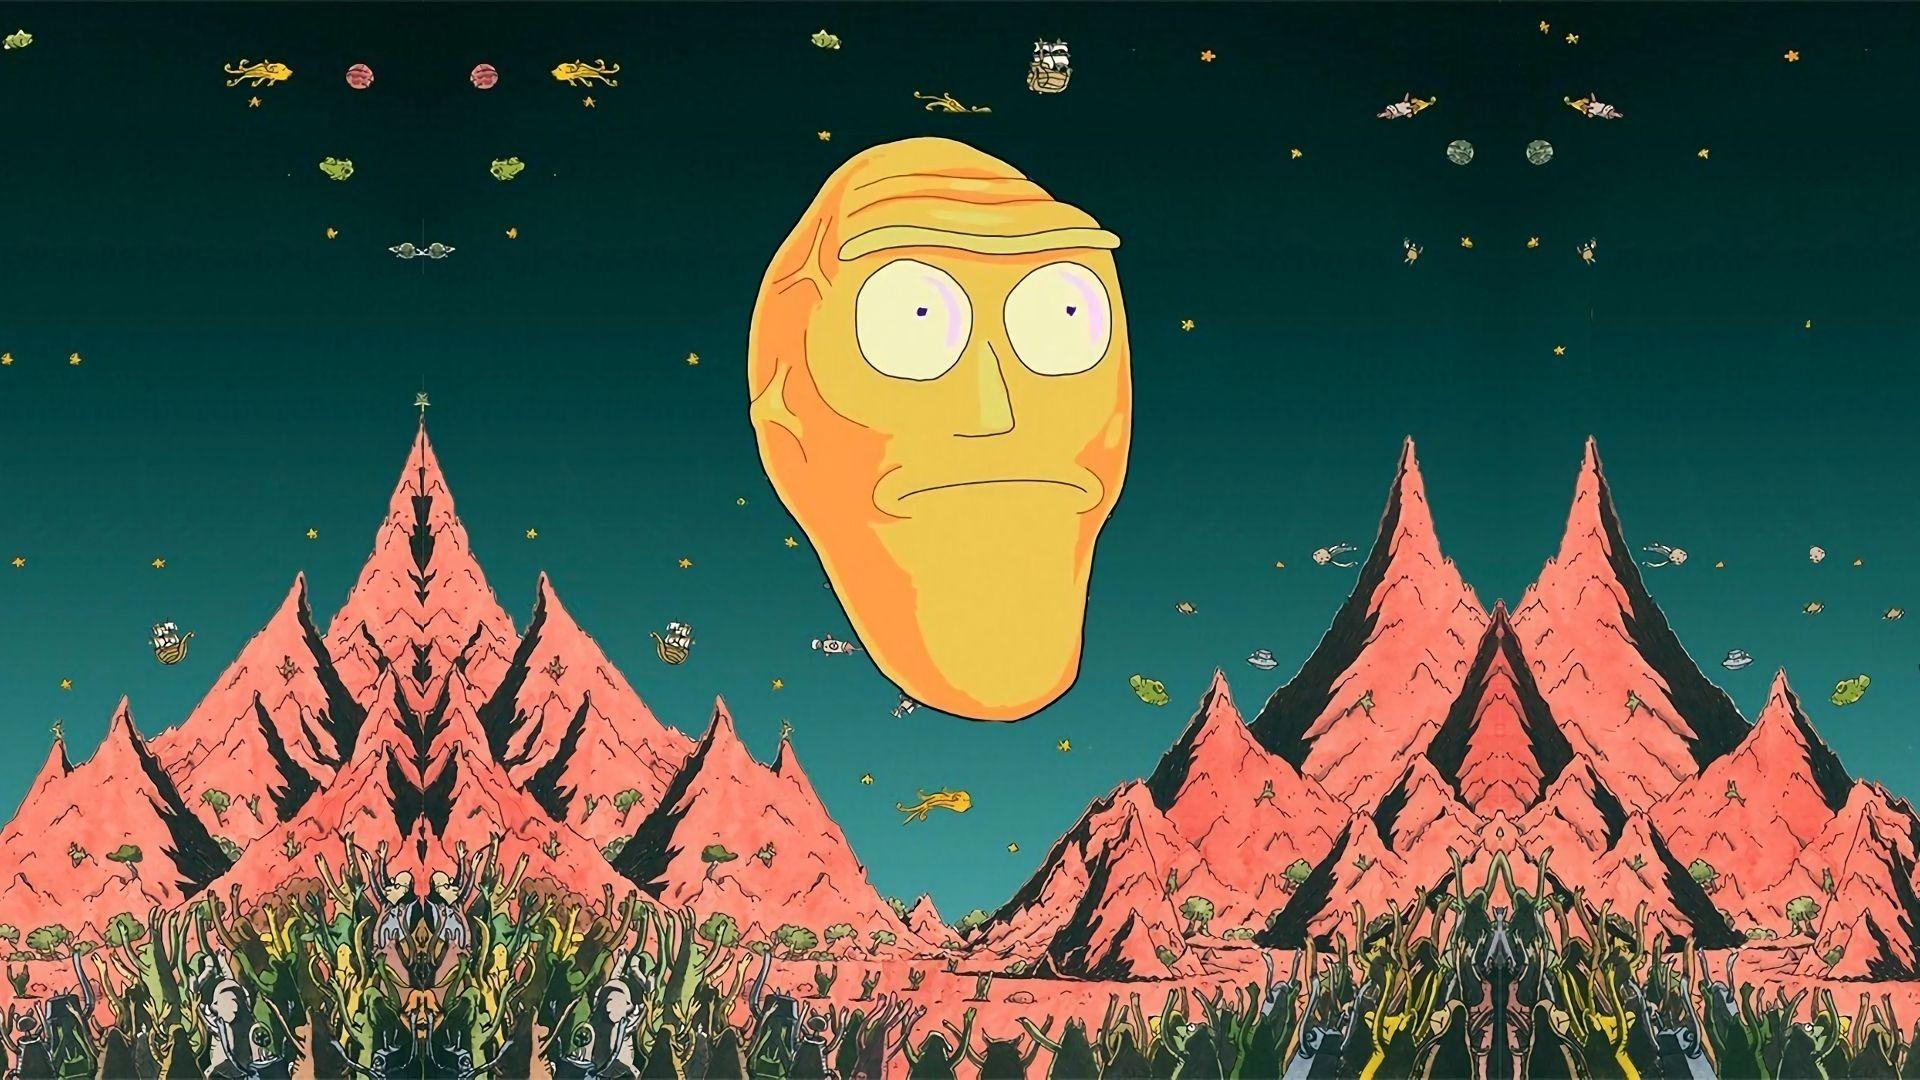 Rick And Morty Dual Screen Wallpapers Top Free Rick And